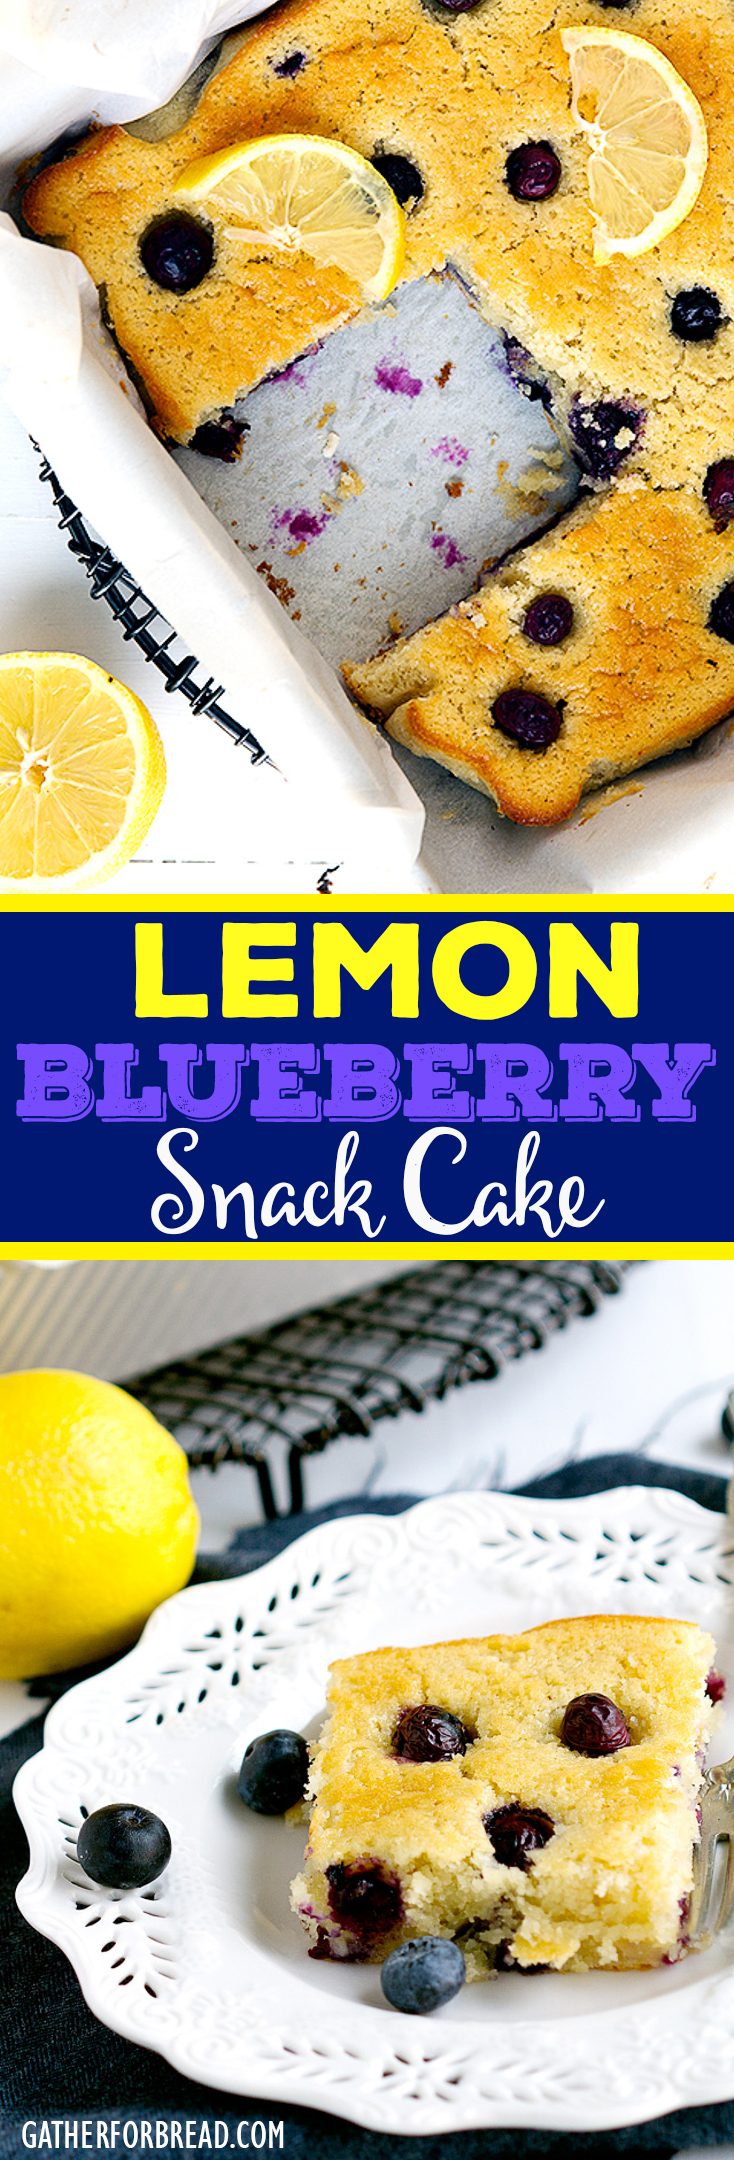 Lemon Blueberry Snack Cake - Simple cake in a pan with fresh blueberries and lemon for zest. Delightful! | gatherforbread.com